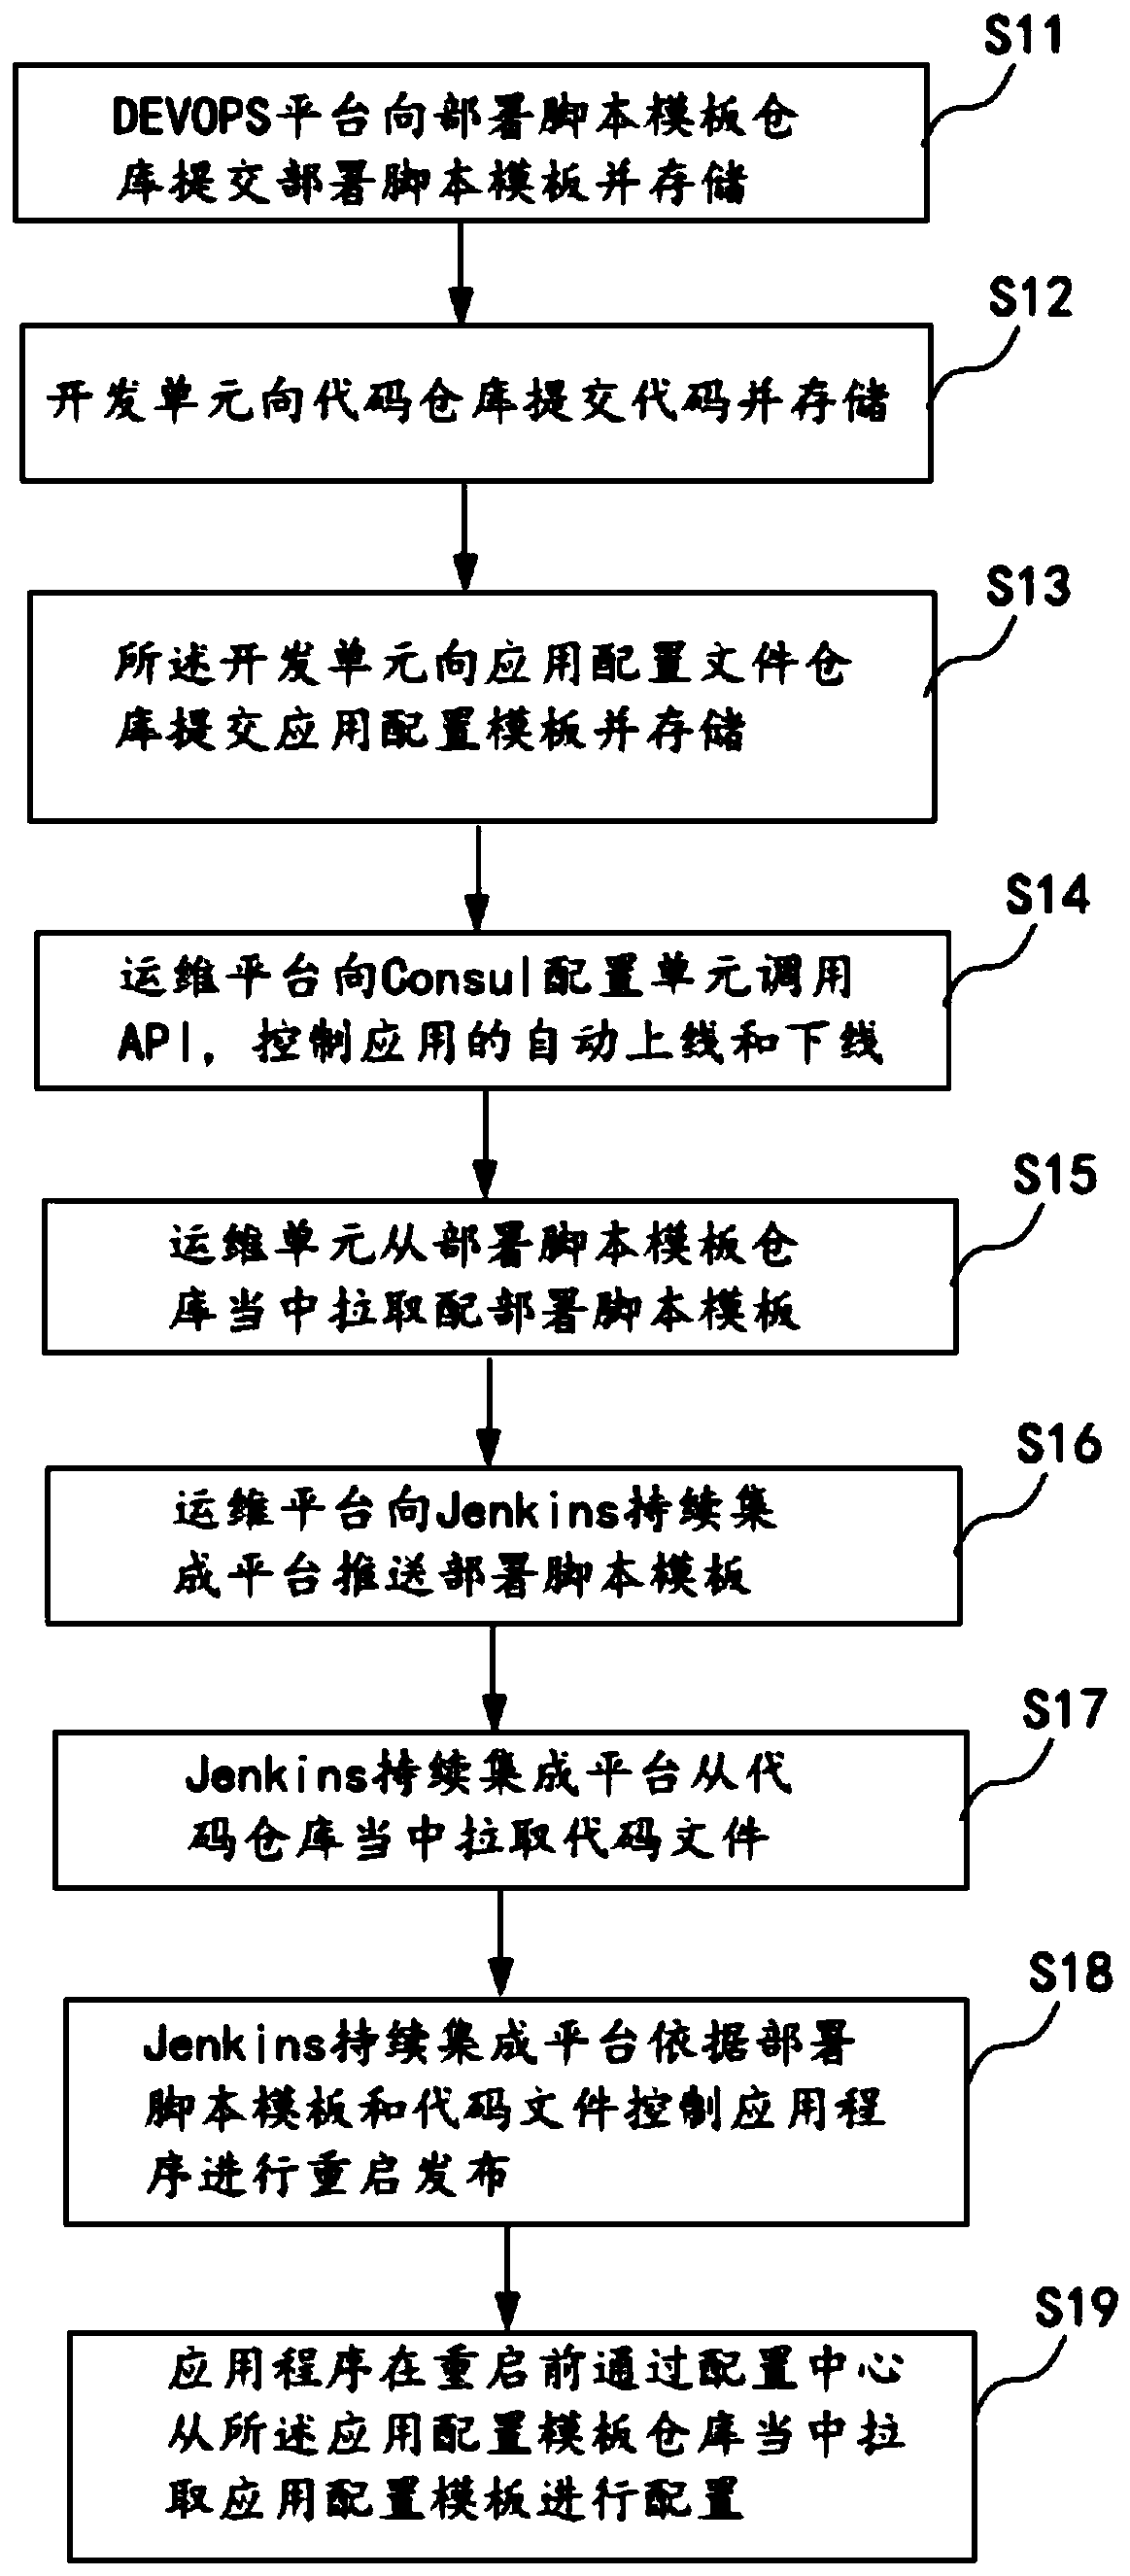 A system and method for application release and configuration